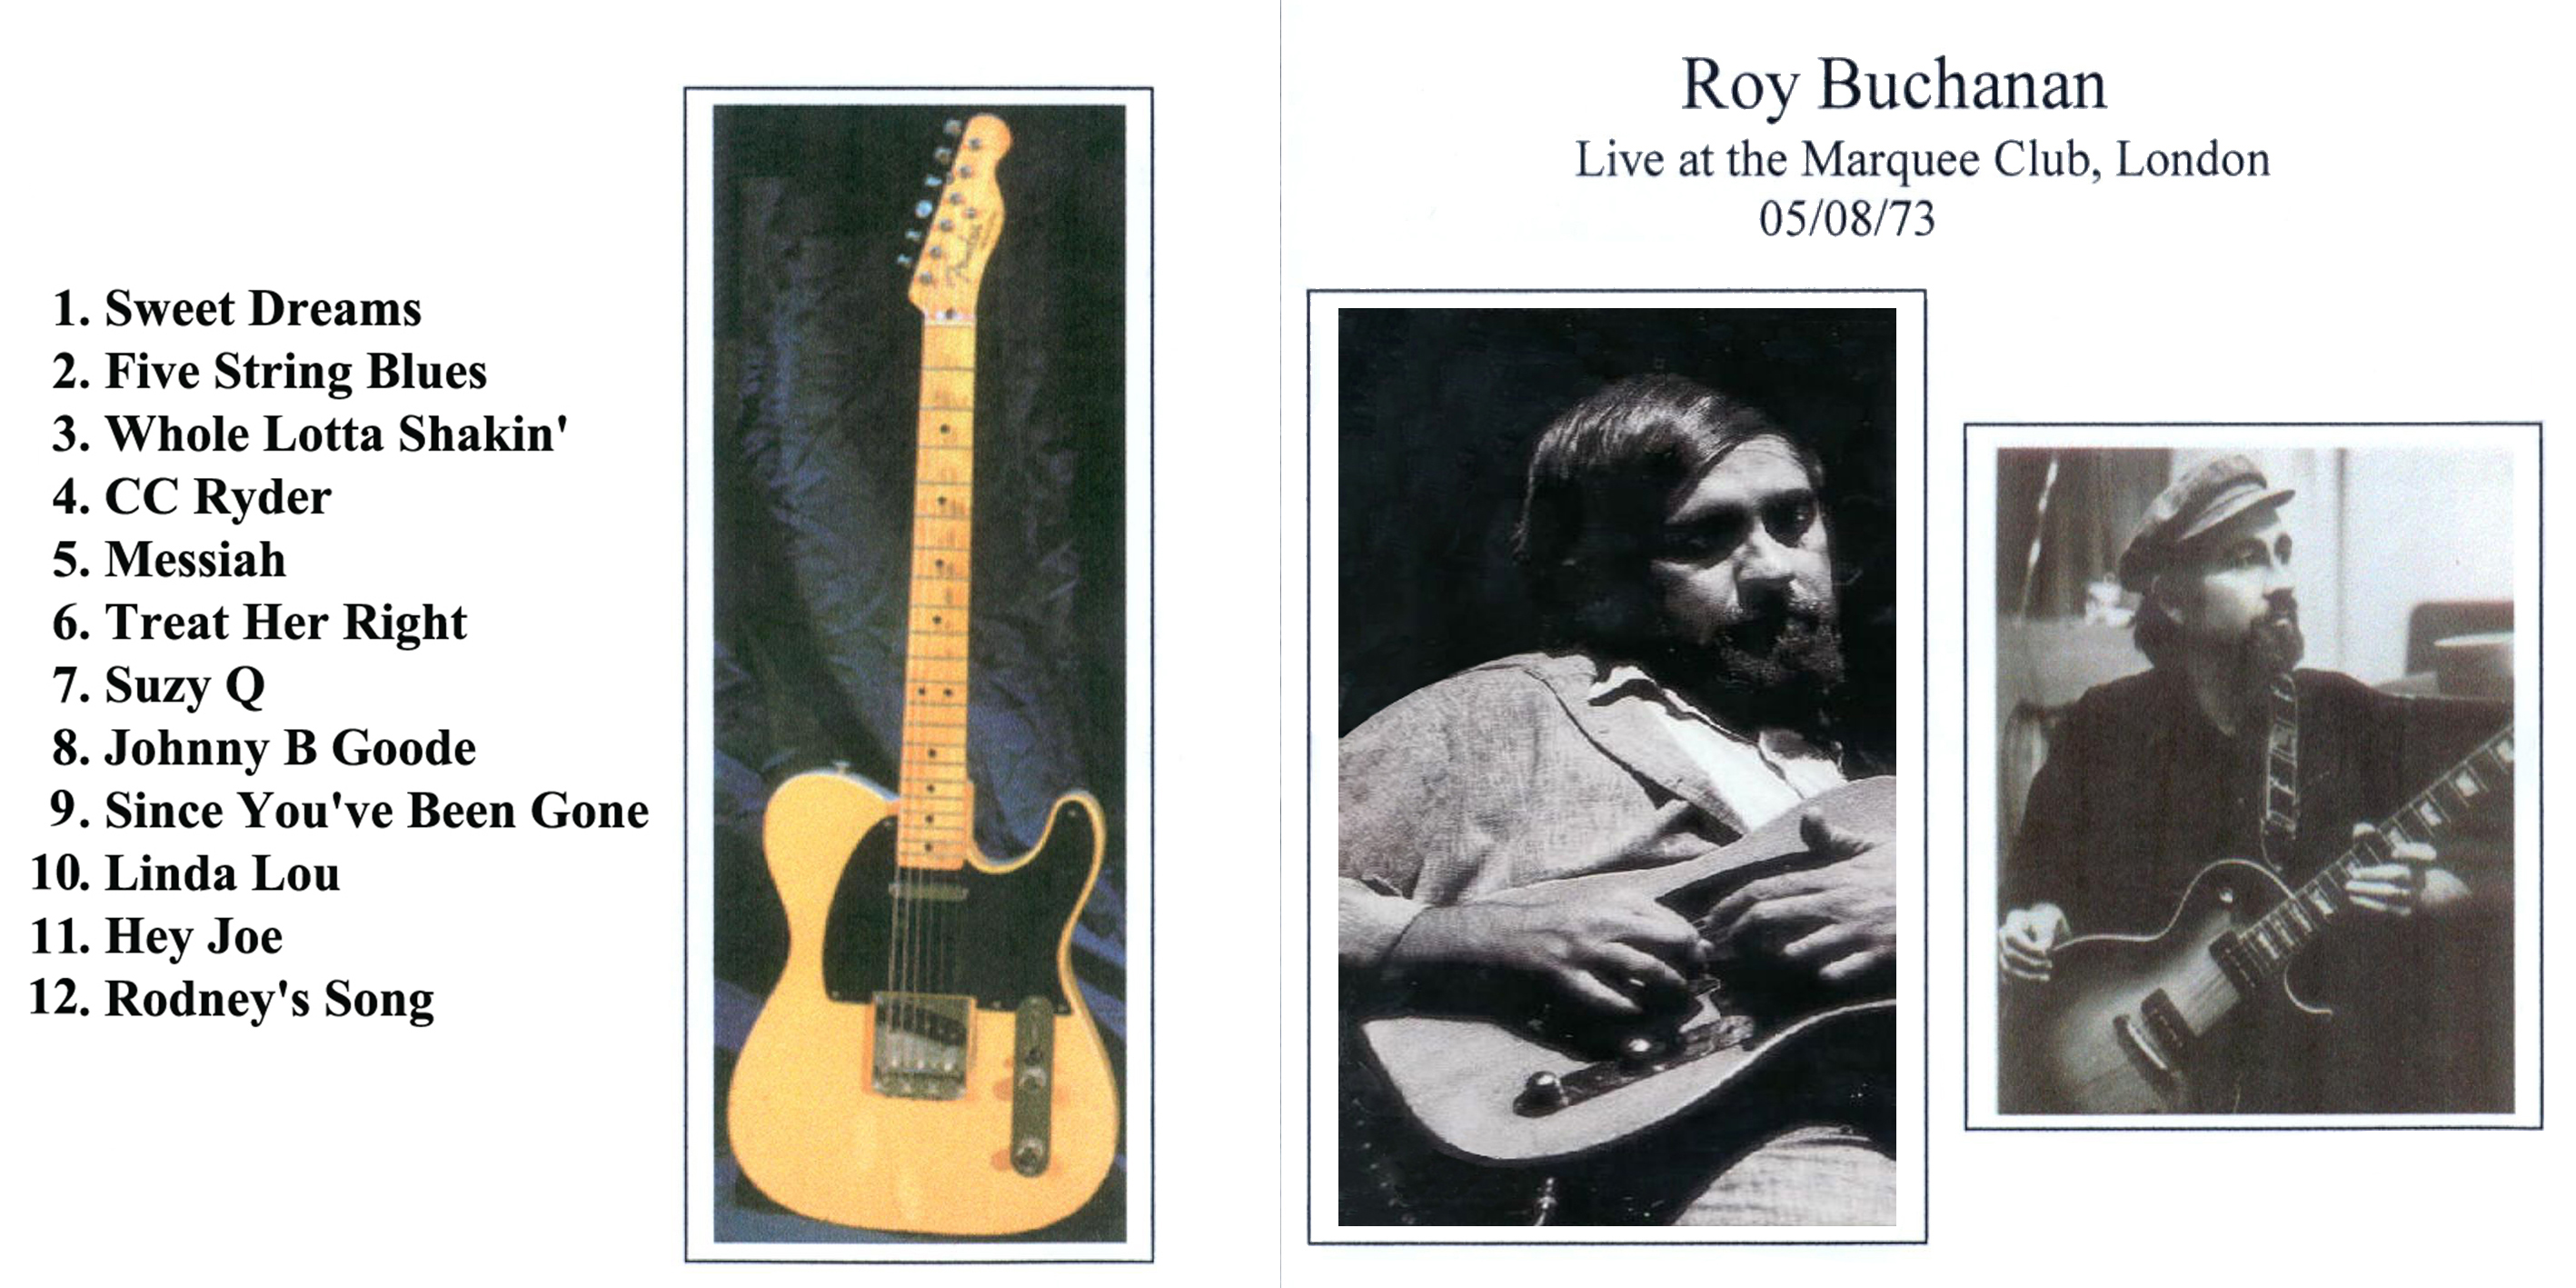 roy buchanan 1973 05 08 marquee club london enlarged out one cd